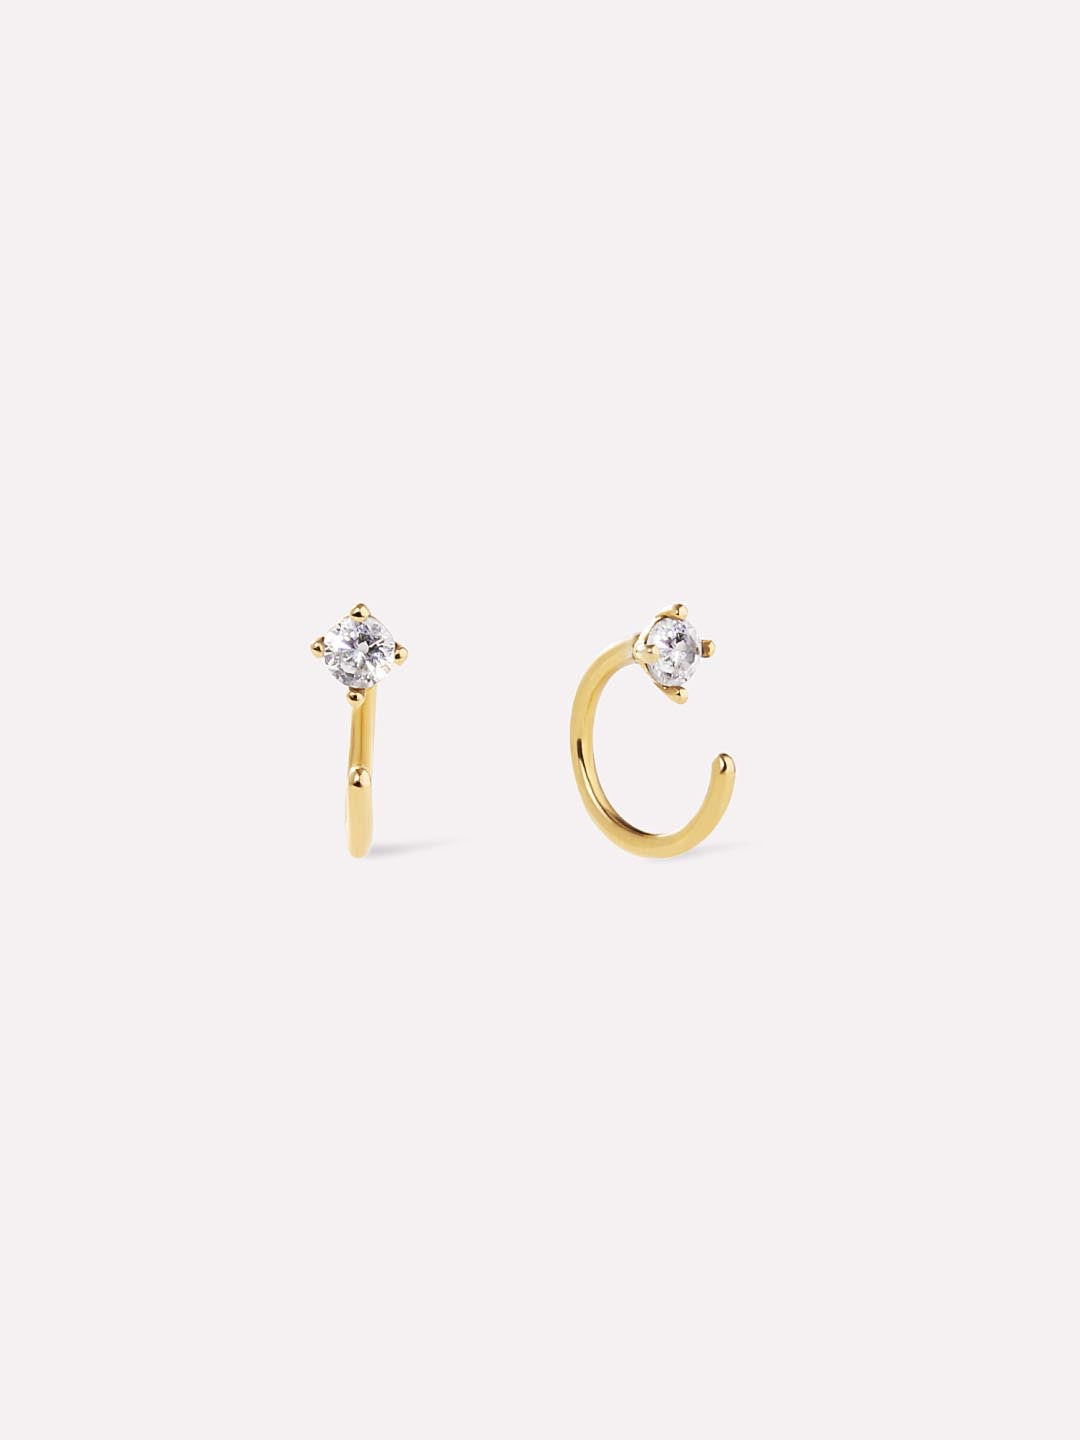 Safety Pin Earrings - Sia Silver, Ana Luisa